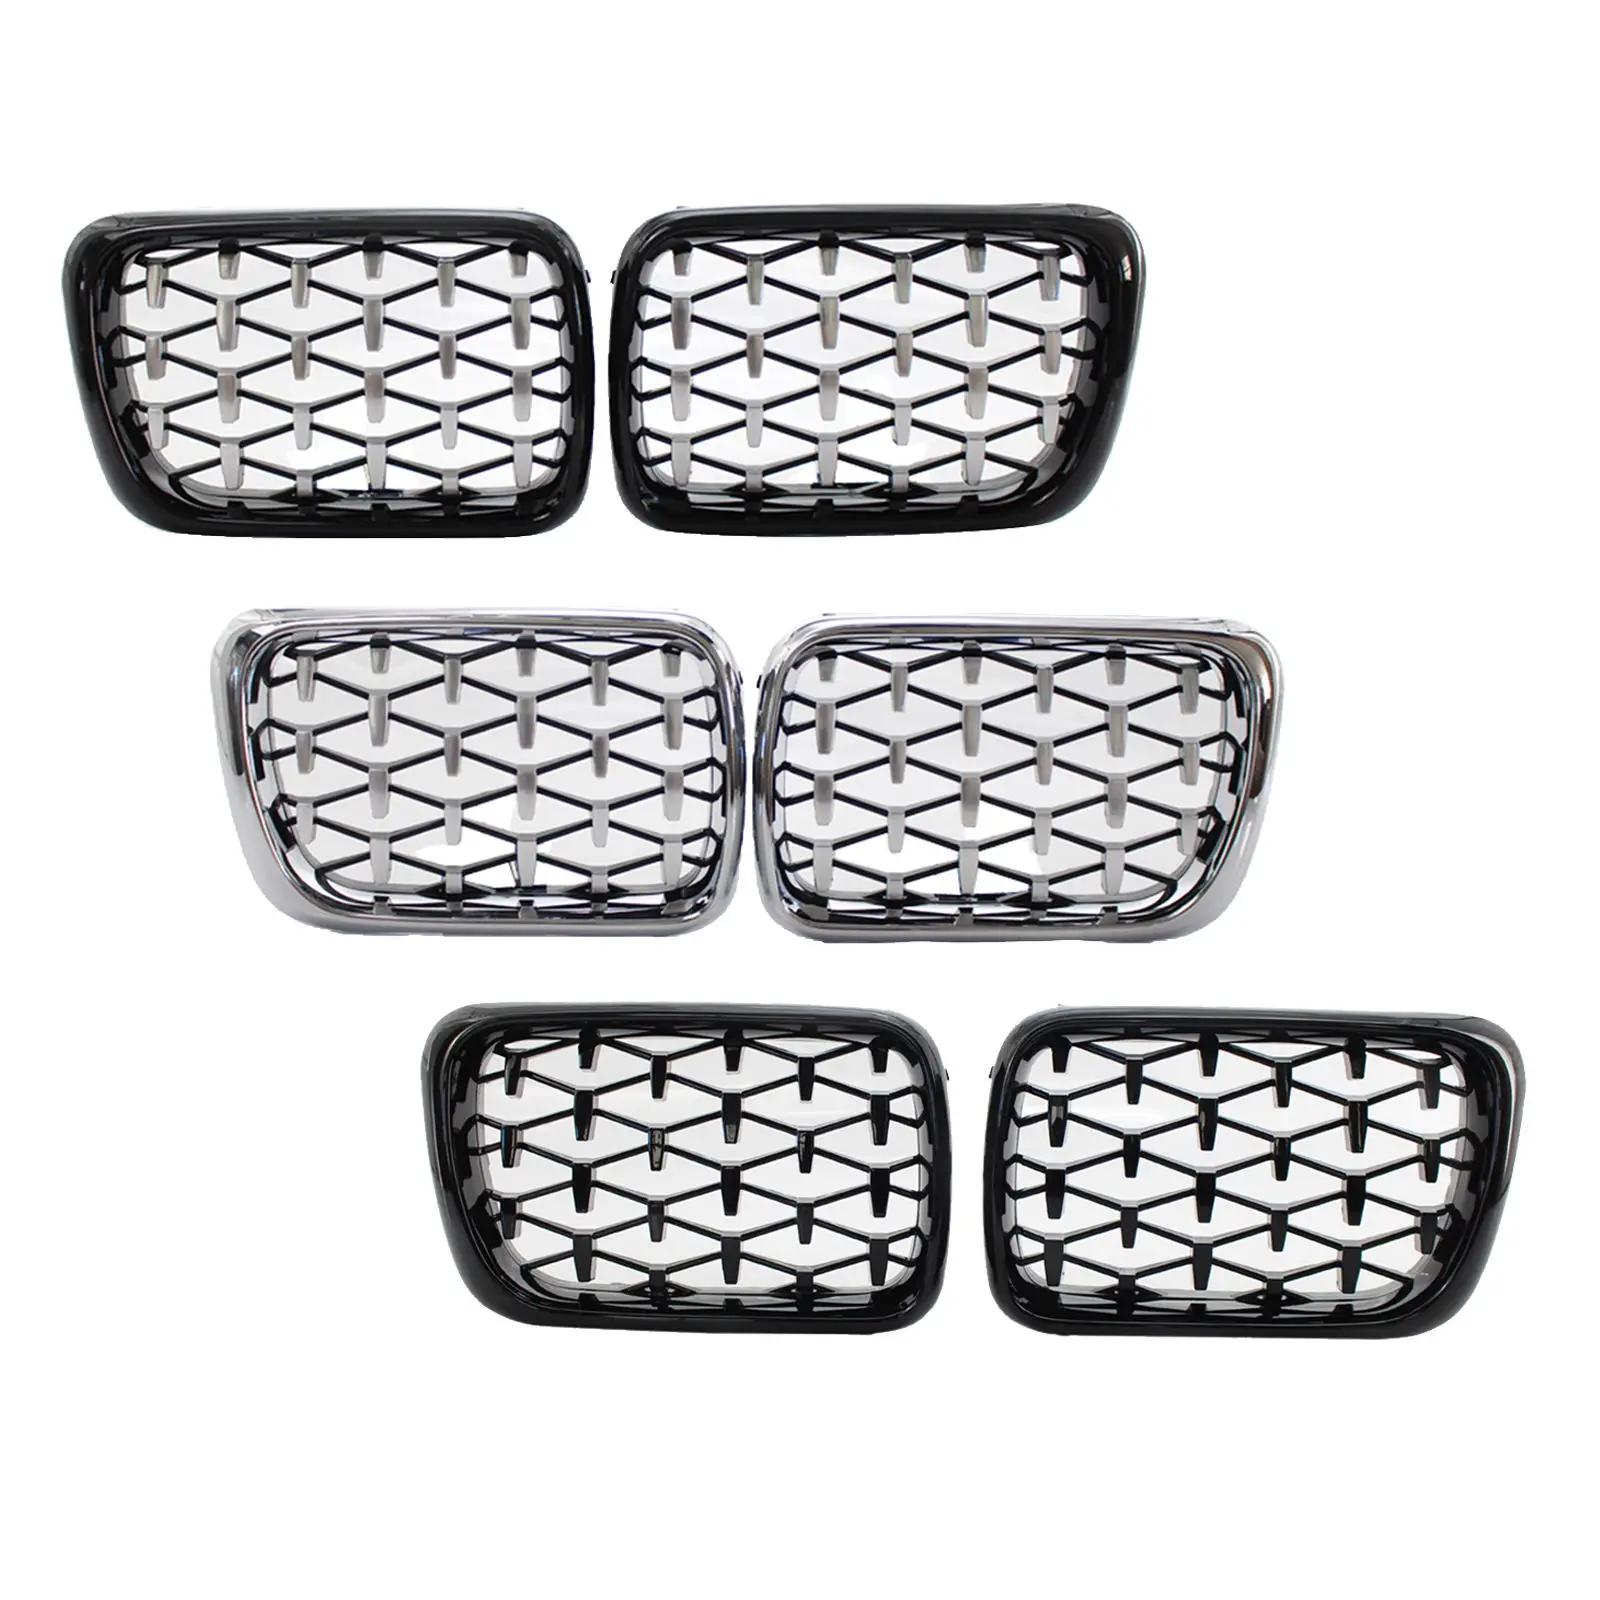 1Pair Auto Car Front Bumper Kidney Grill for  E36 3 Series 1997-1999, Complete kit, comes as a pair.